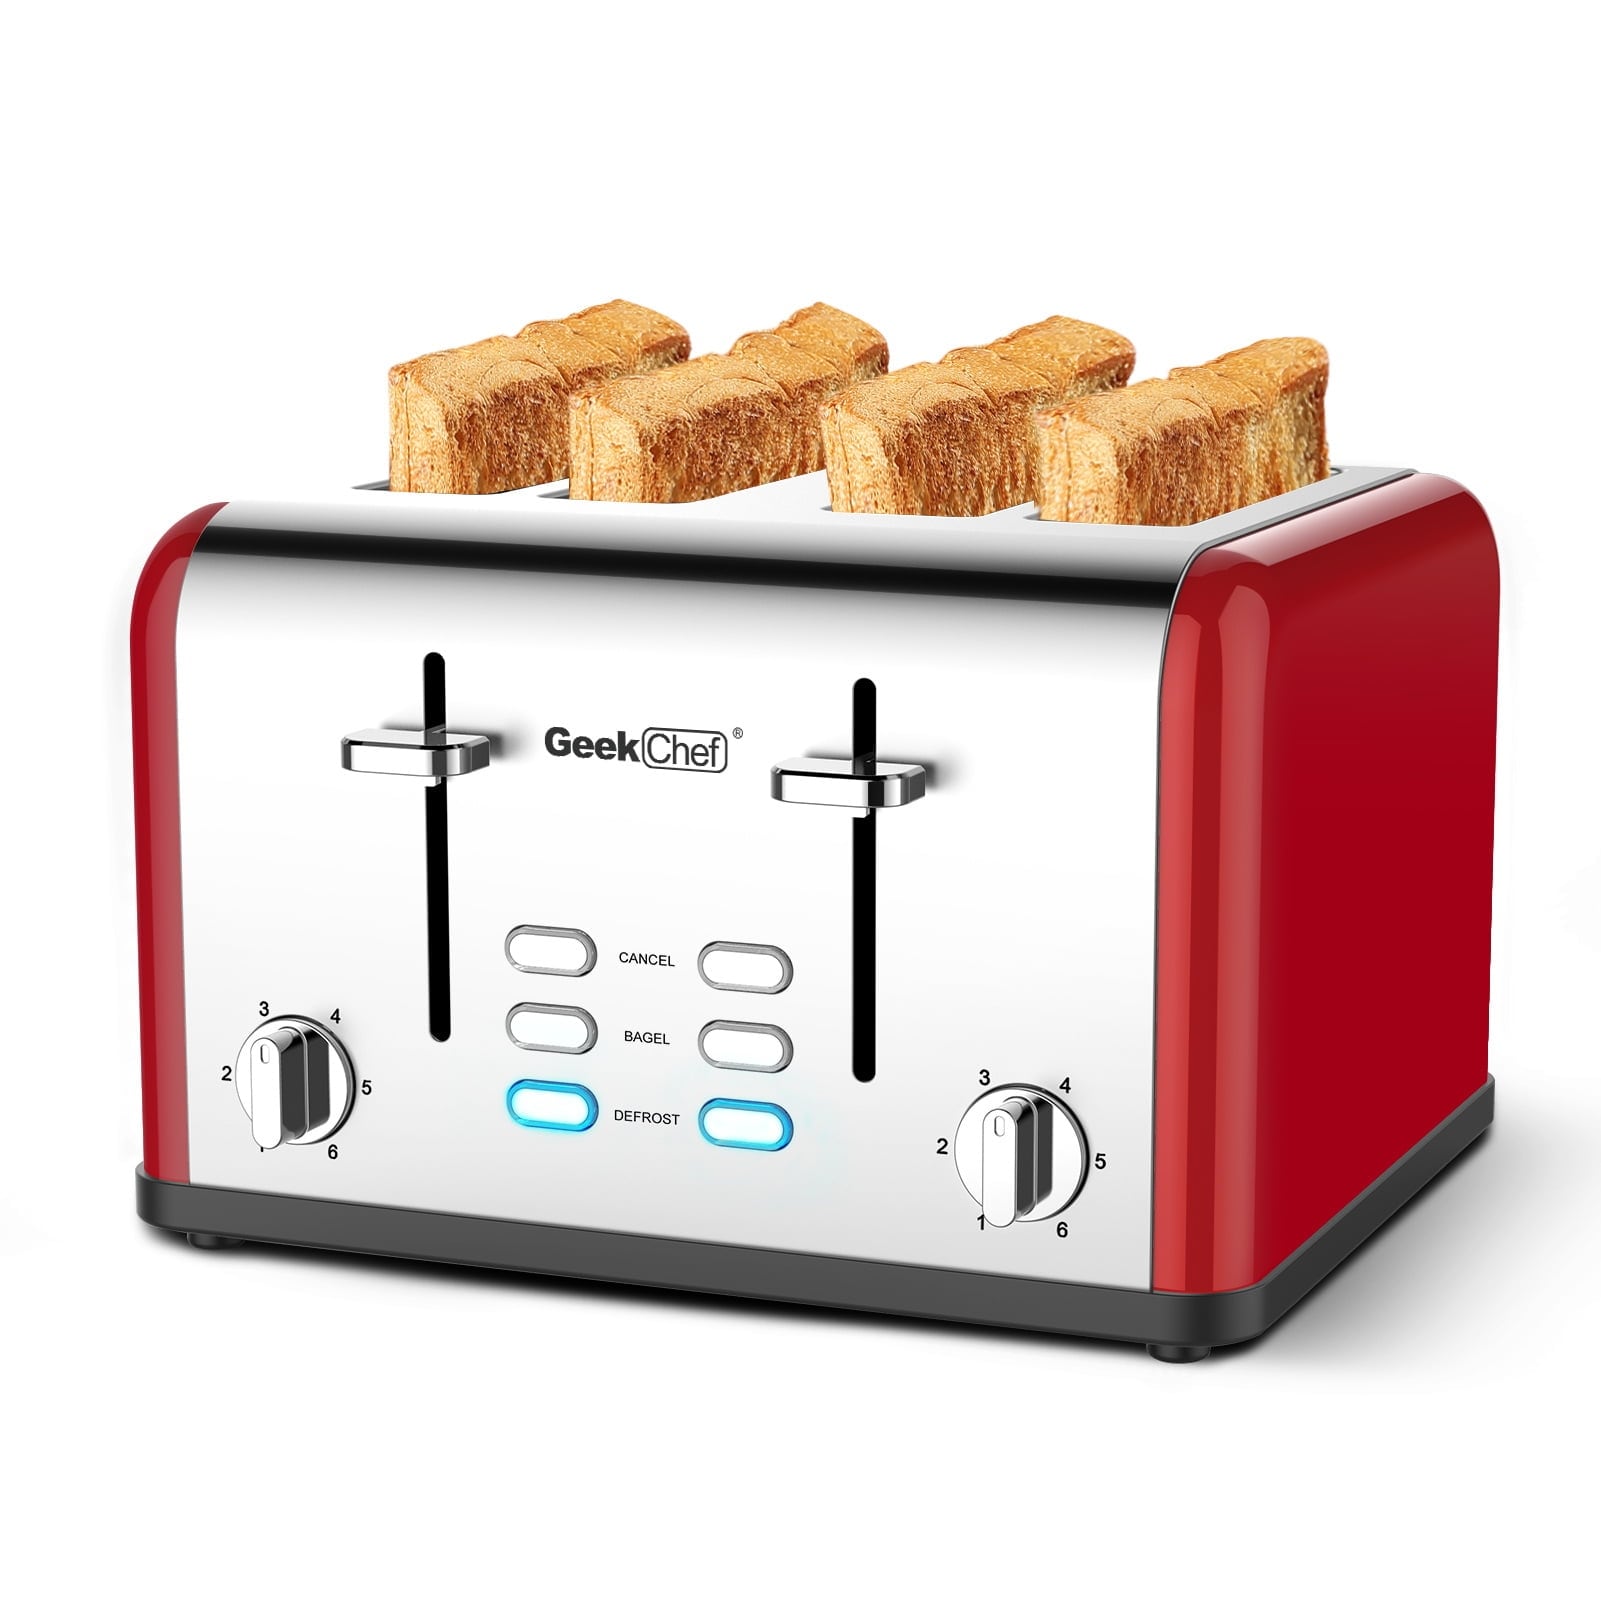 Extra-Wide Slot Toaster, Removable Crumb Trays, Auto Pop-Up